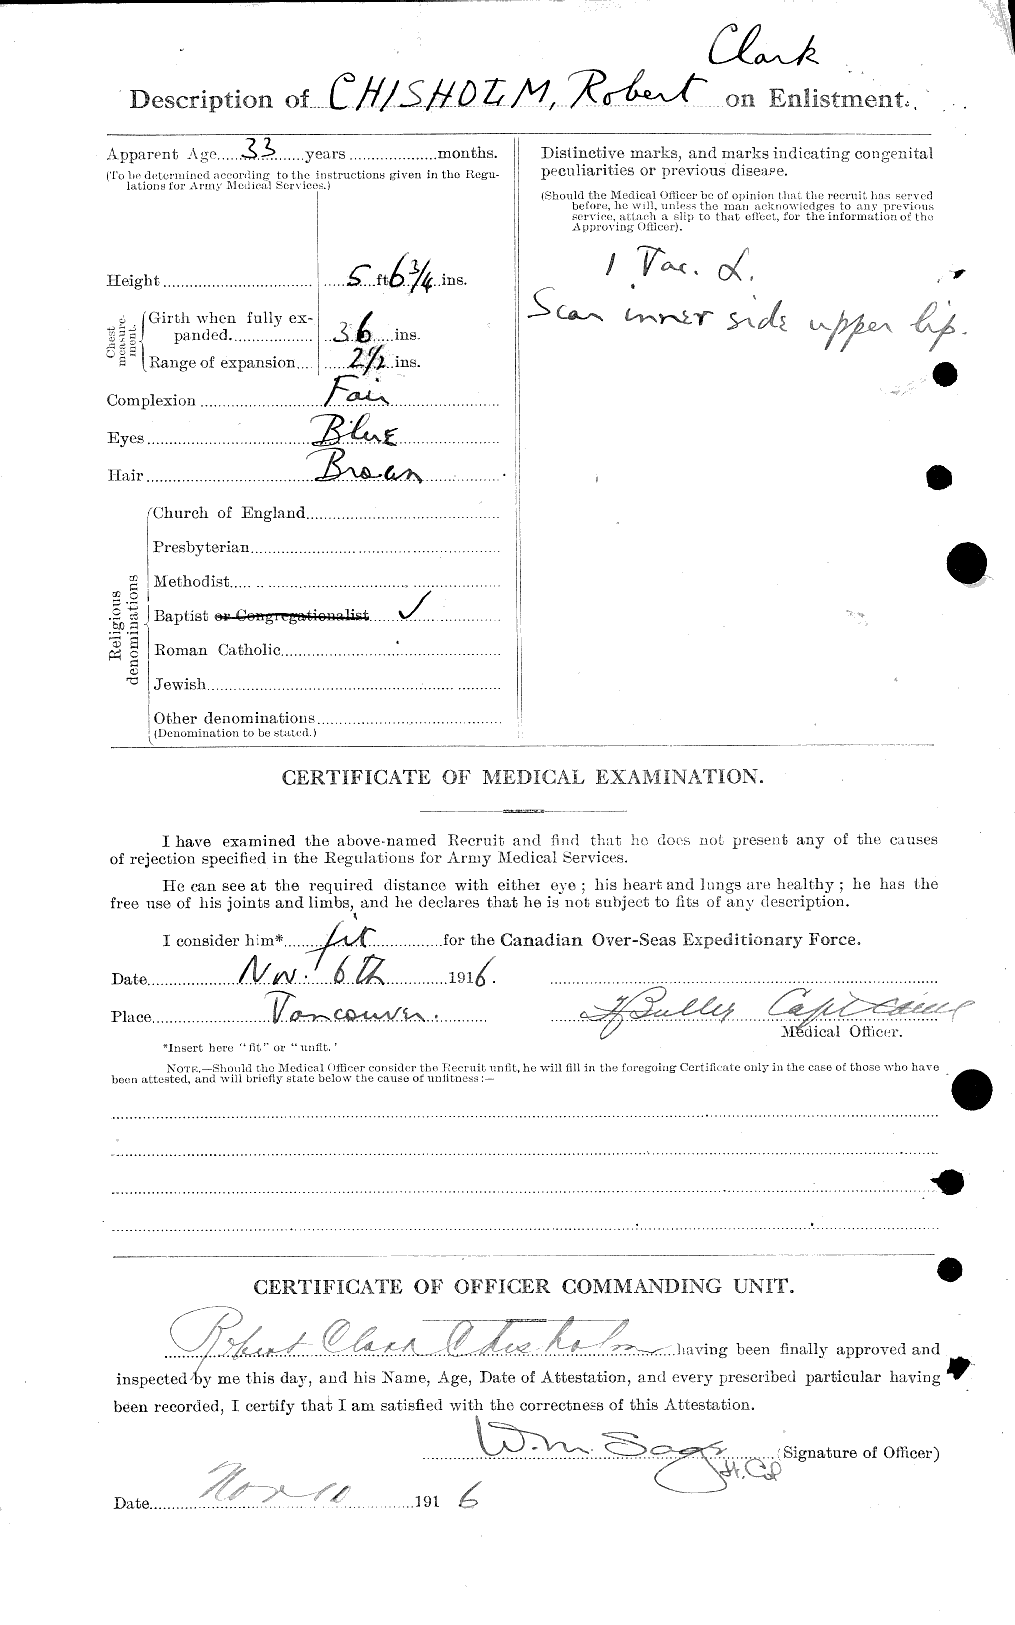 Personnel Records of the First World War - CEF 018353b